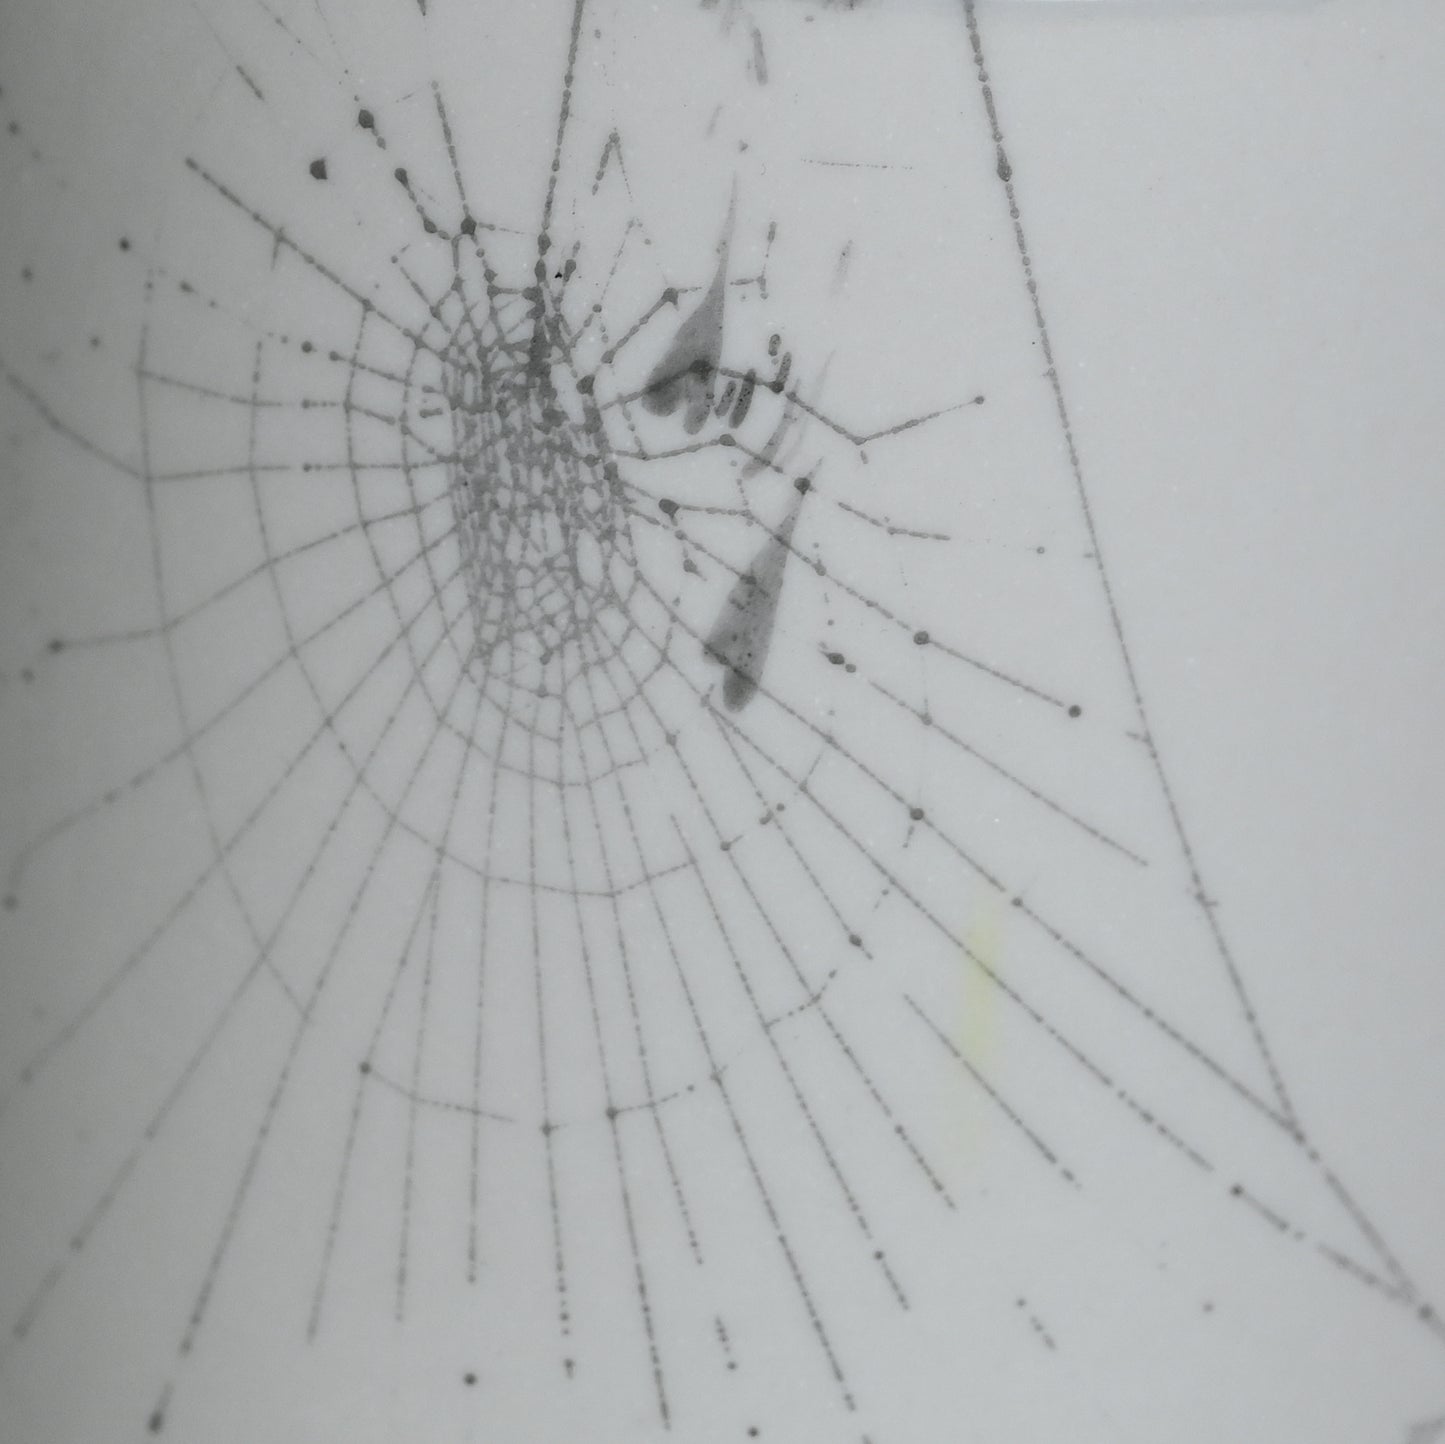 Web on Clay (161), Collected September 12, 2022